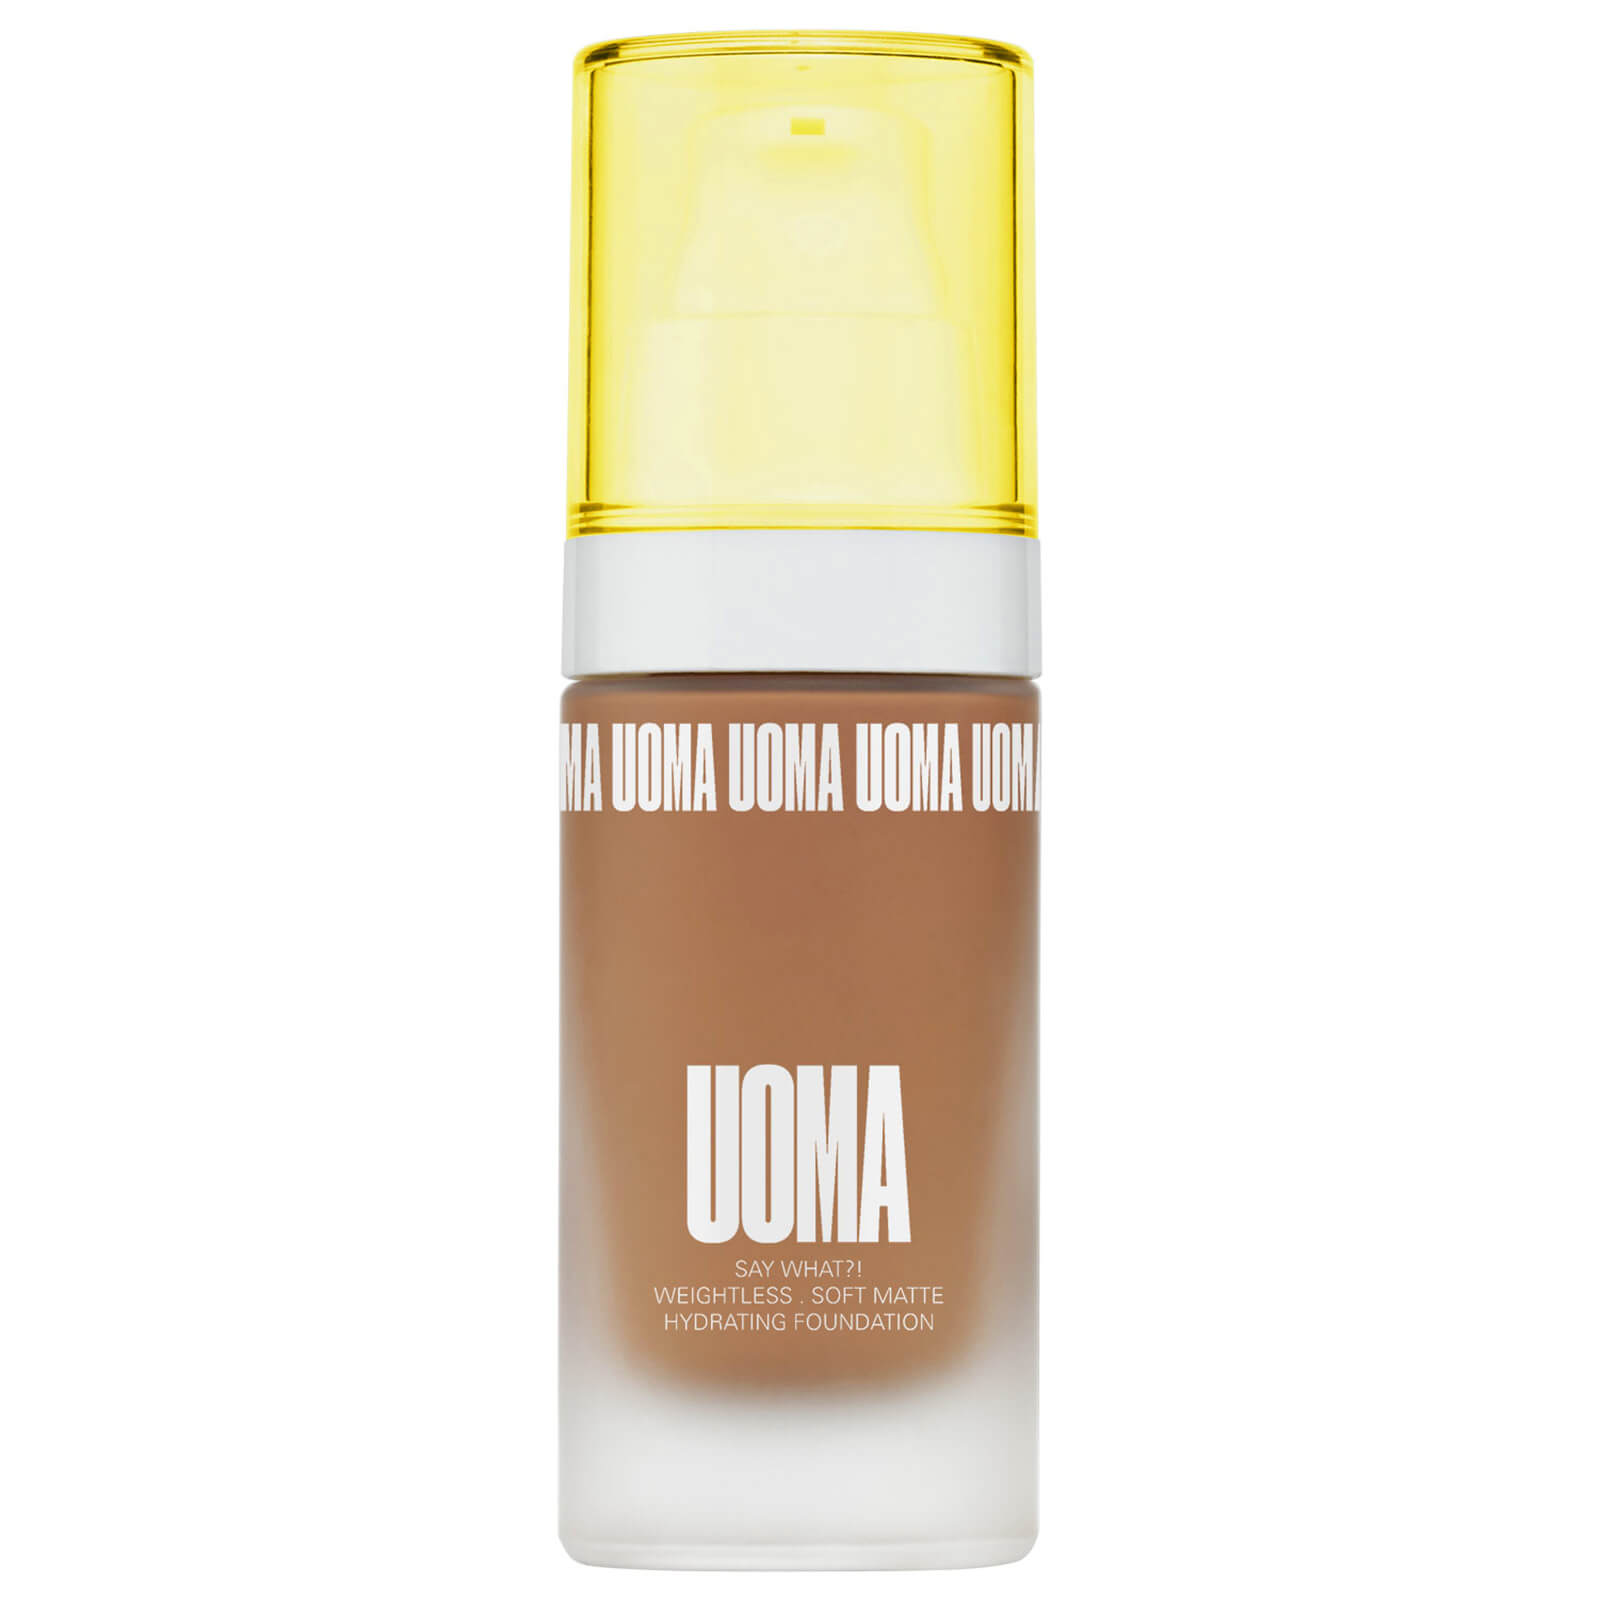 UOMA Beauty Say What Foundation 30ml (Various Shades) - Bronze Venus T1N